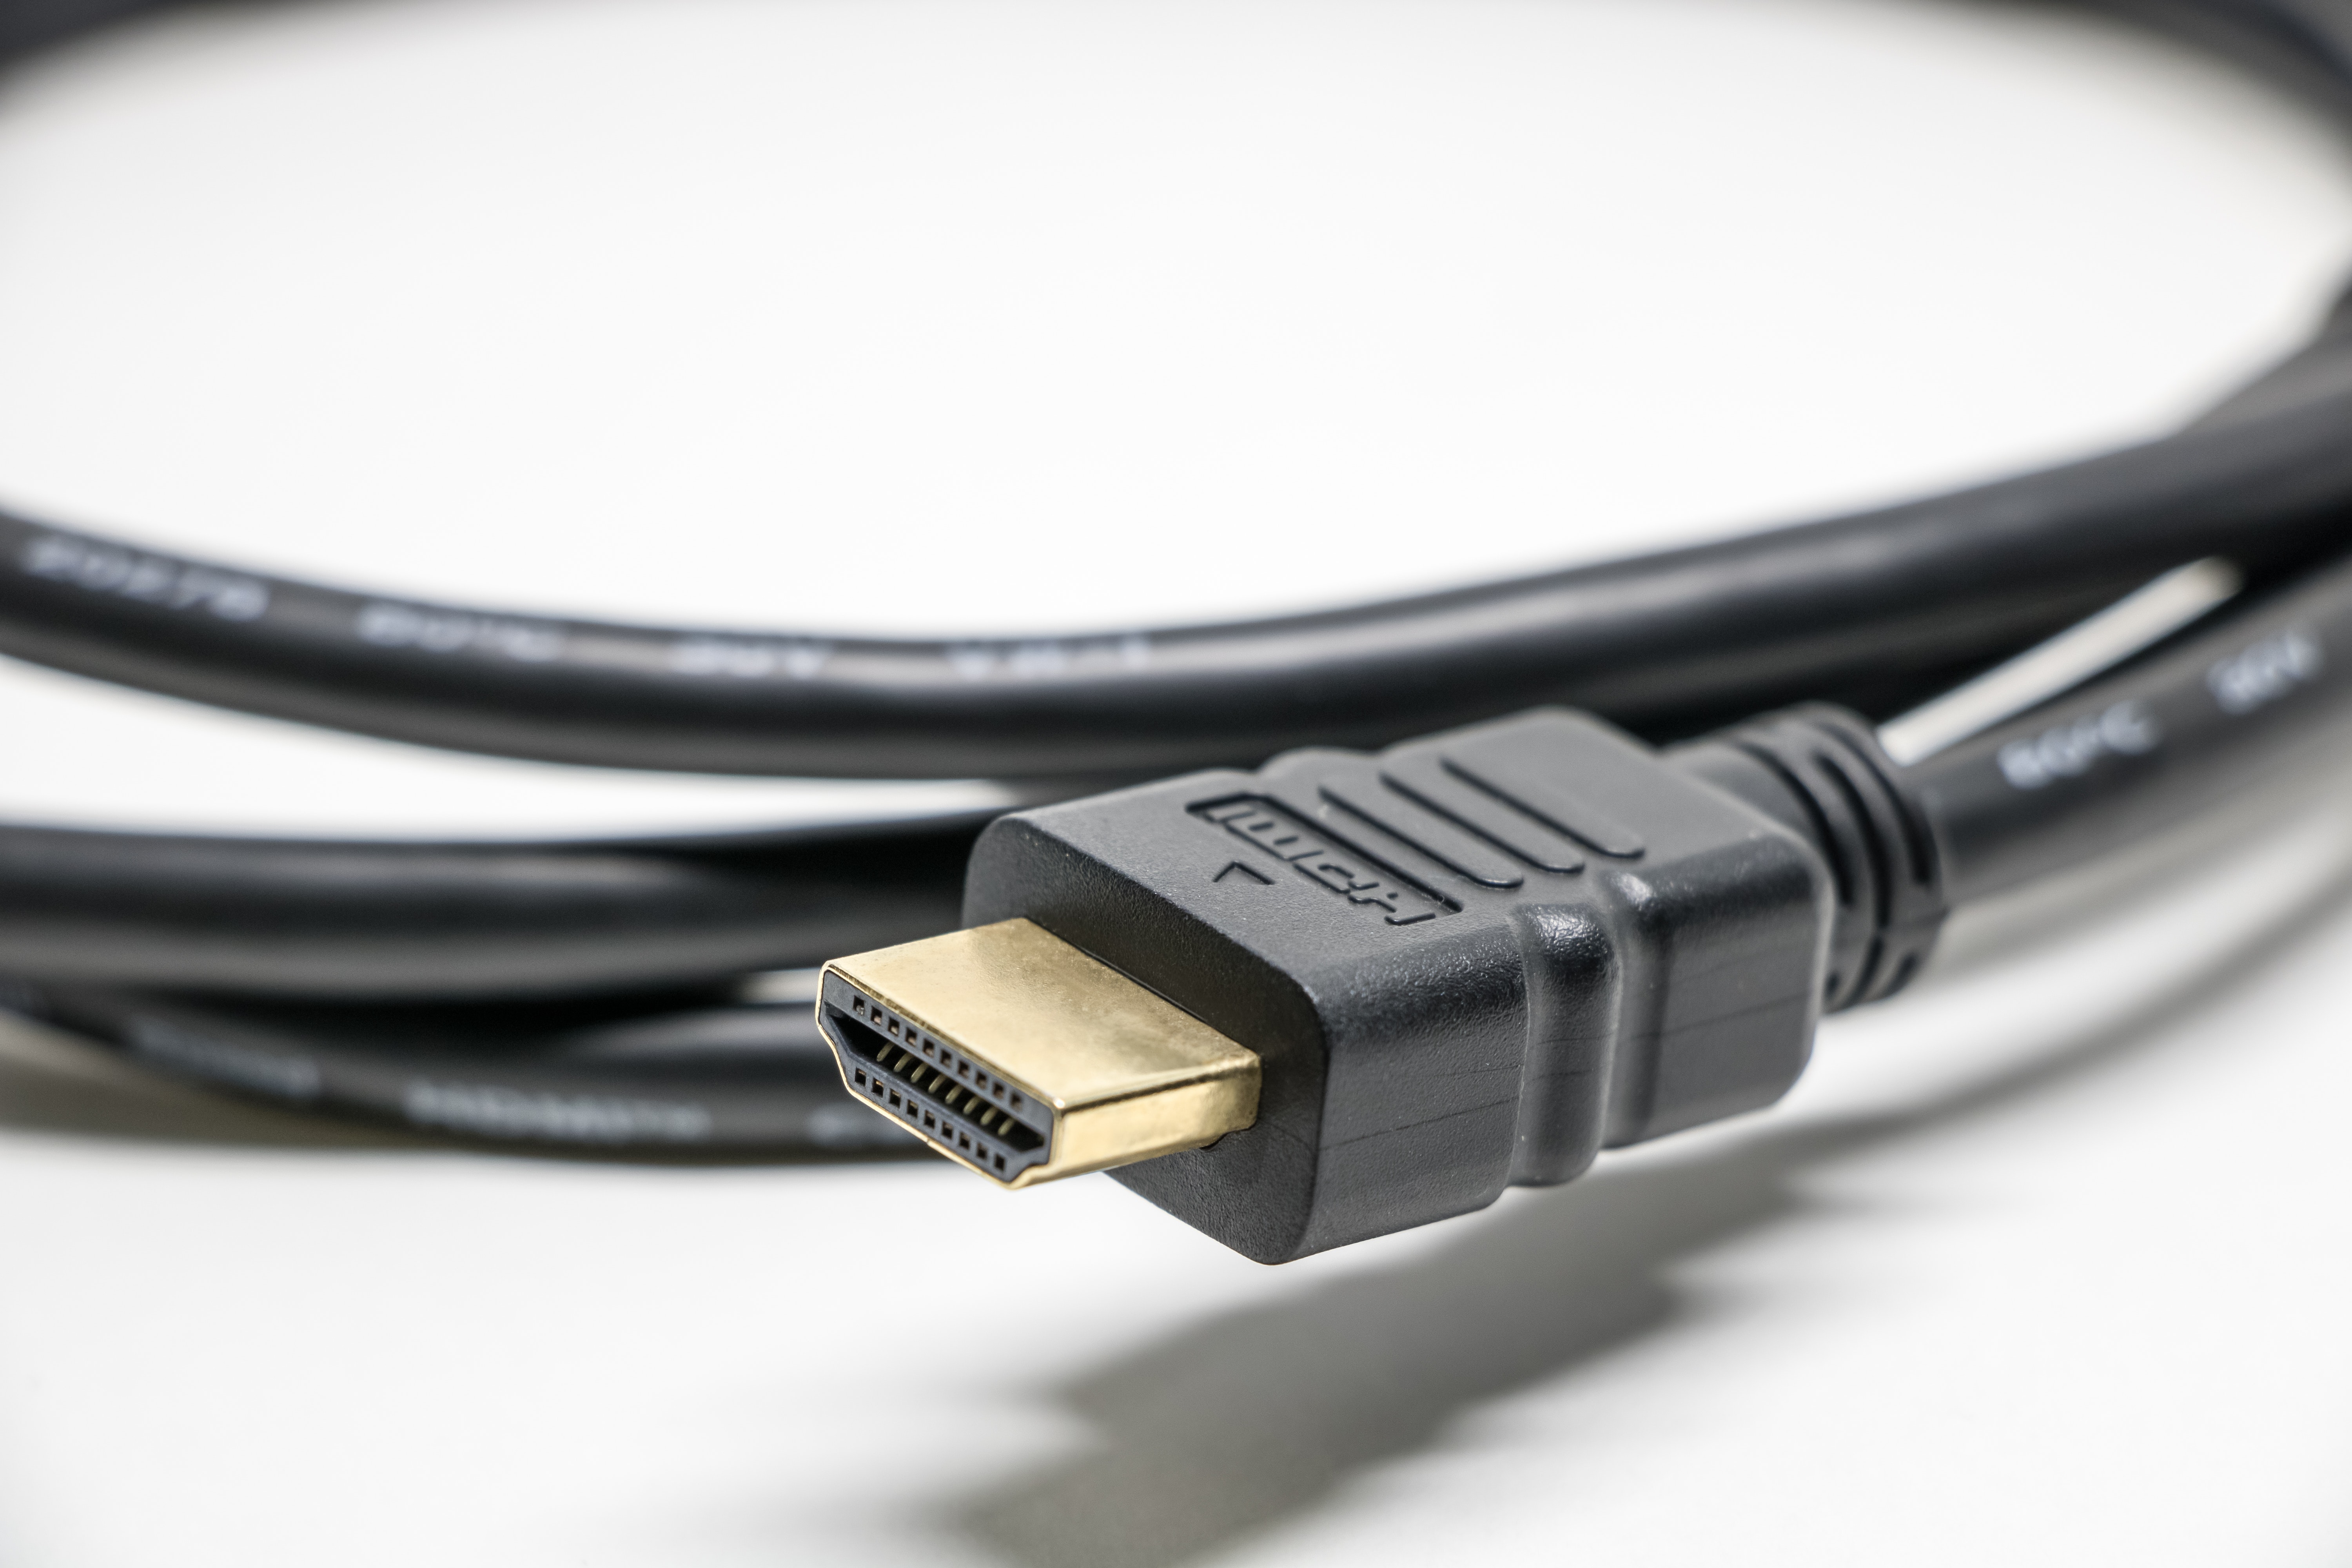 HDMI ARC/eARC: the one-cable TV audio tech fully explained